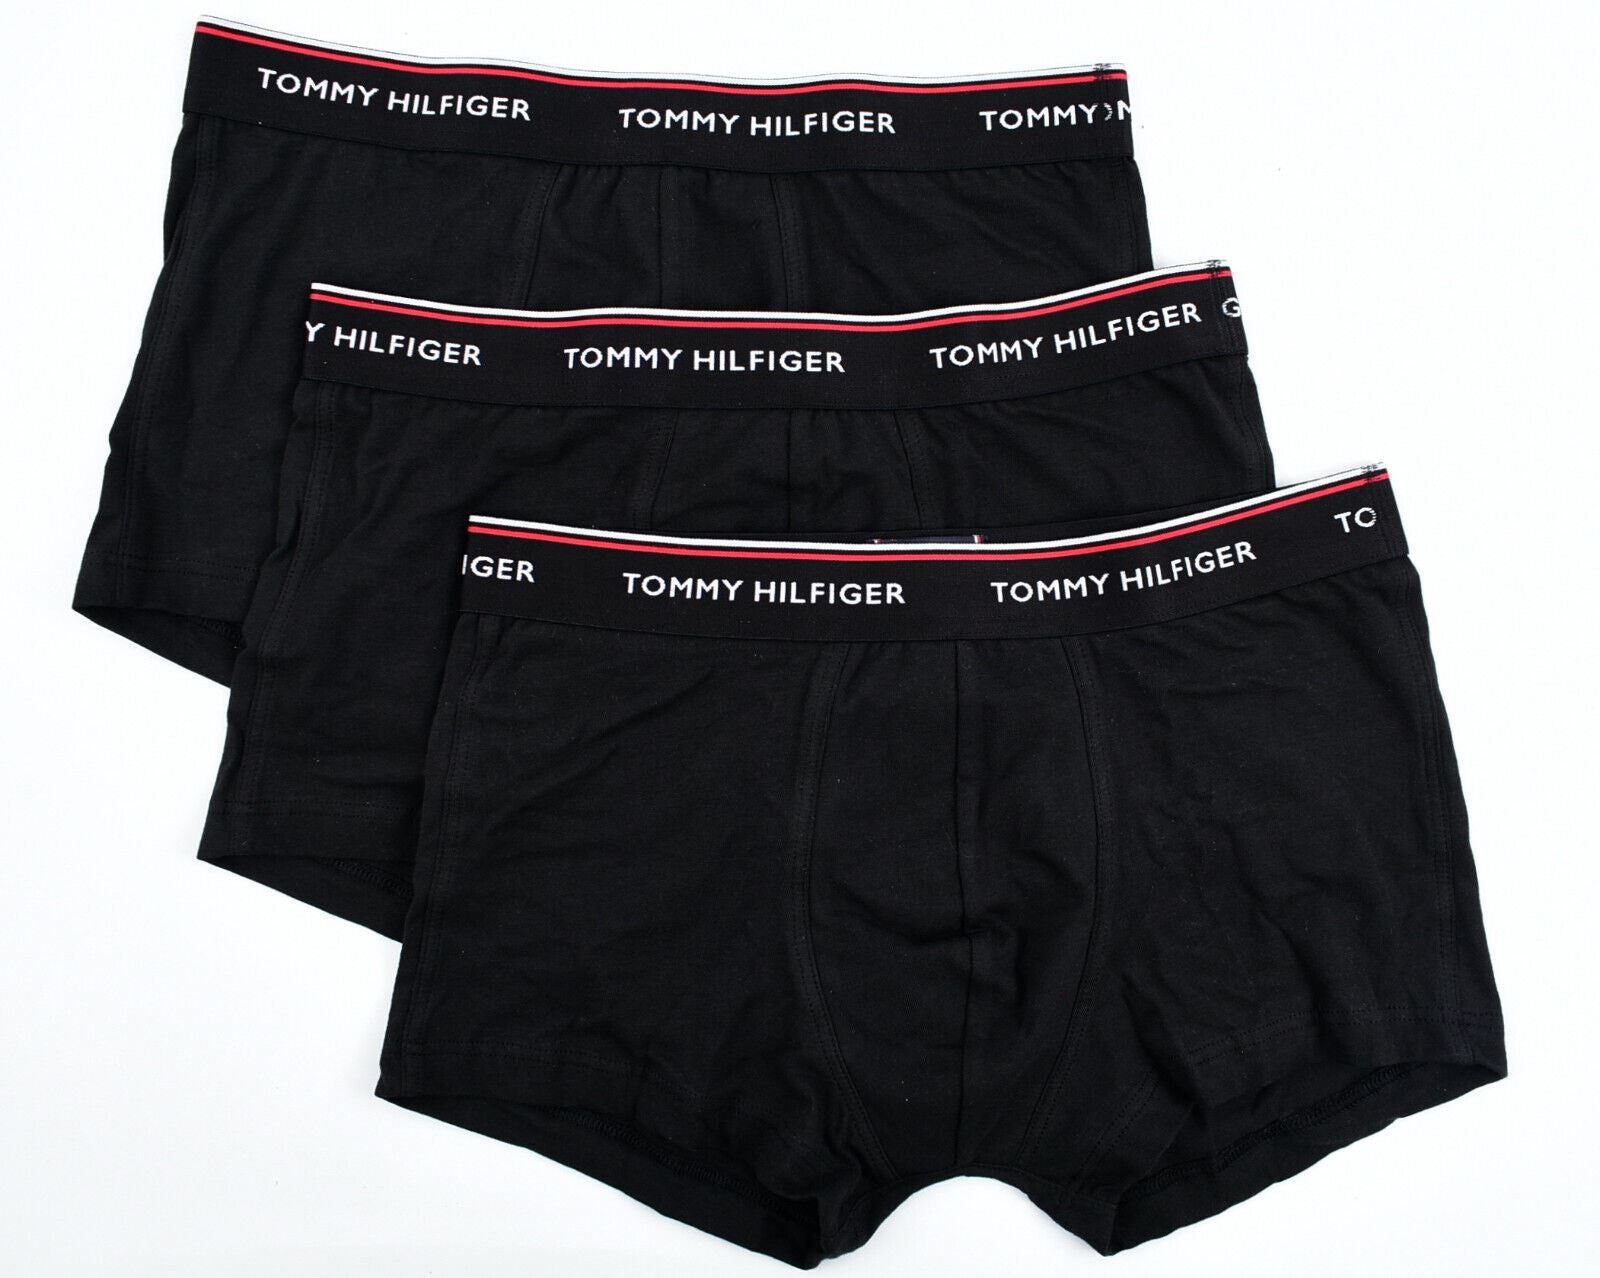 TOMMY HILFIGER Underwear: Men's 3-Pack Low Rise Boxer Trunks, Black, size SMALL